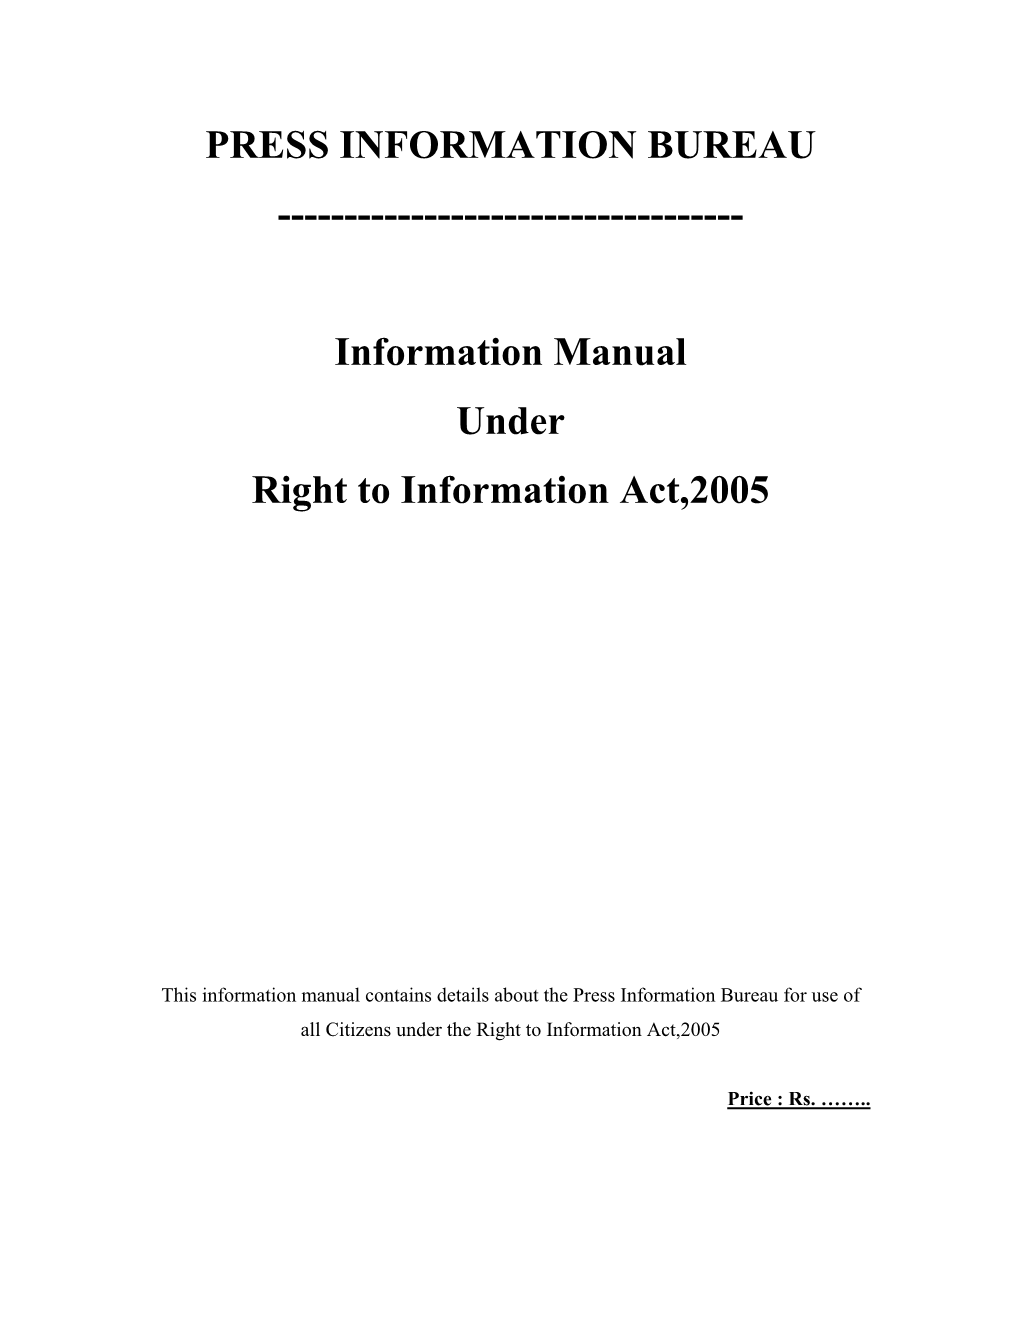 PRESS INFORMATION BUREAU ---Information Manual Under Right to Information Act,2005